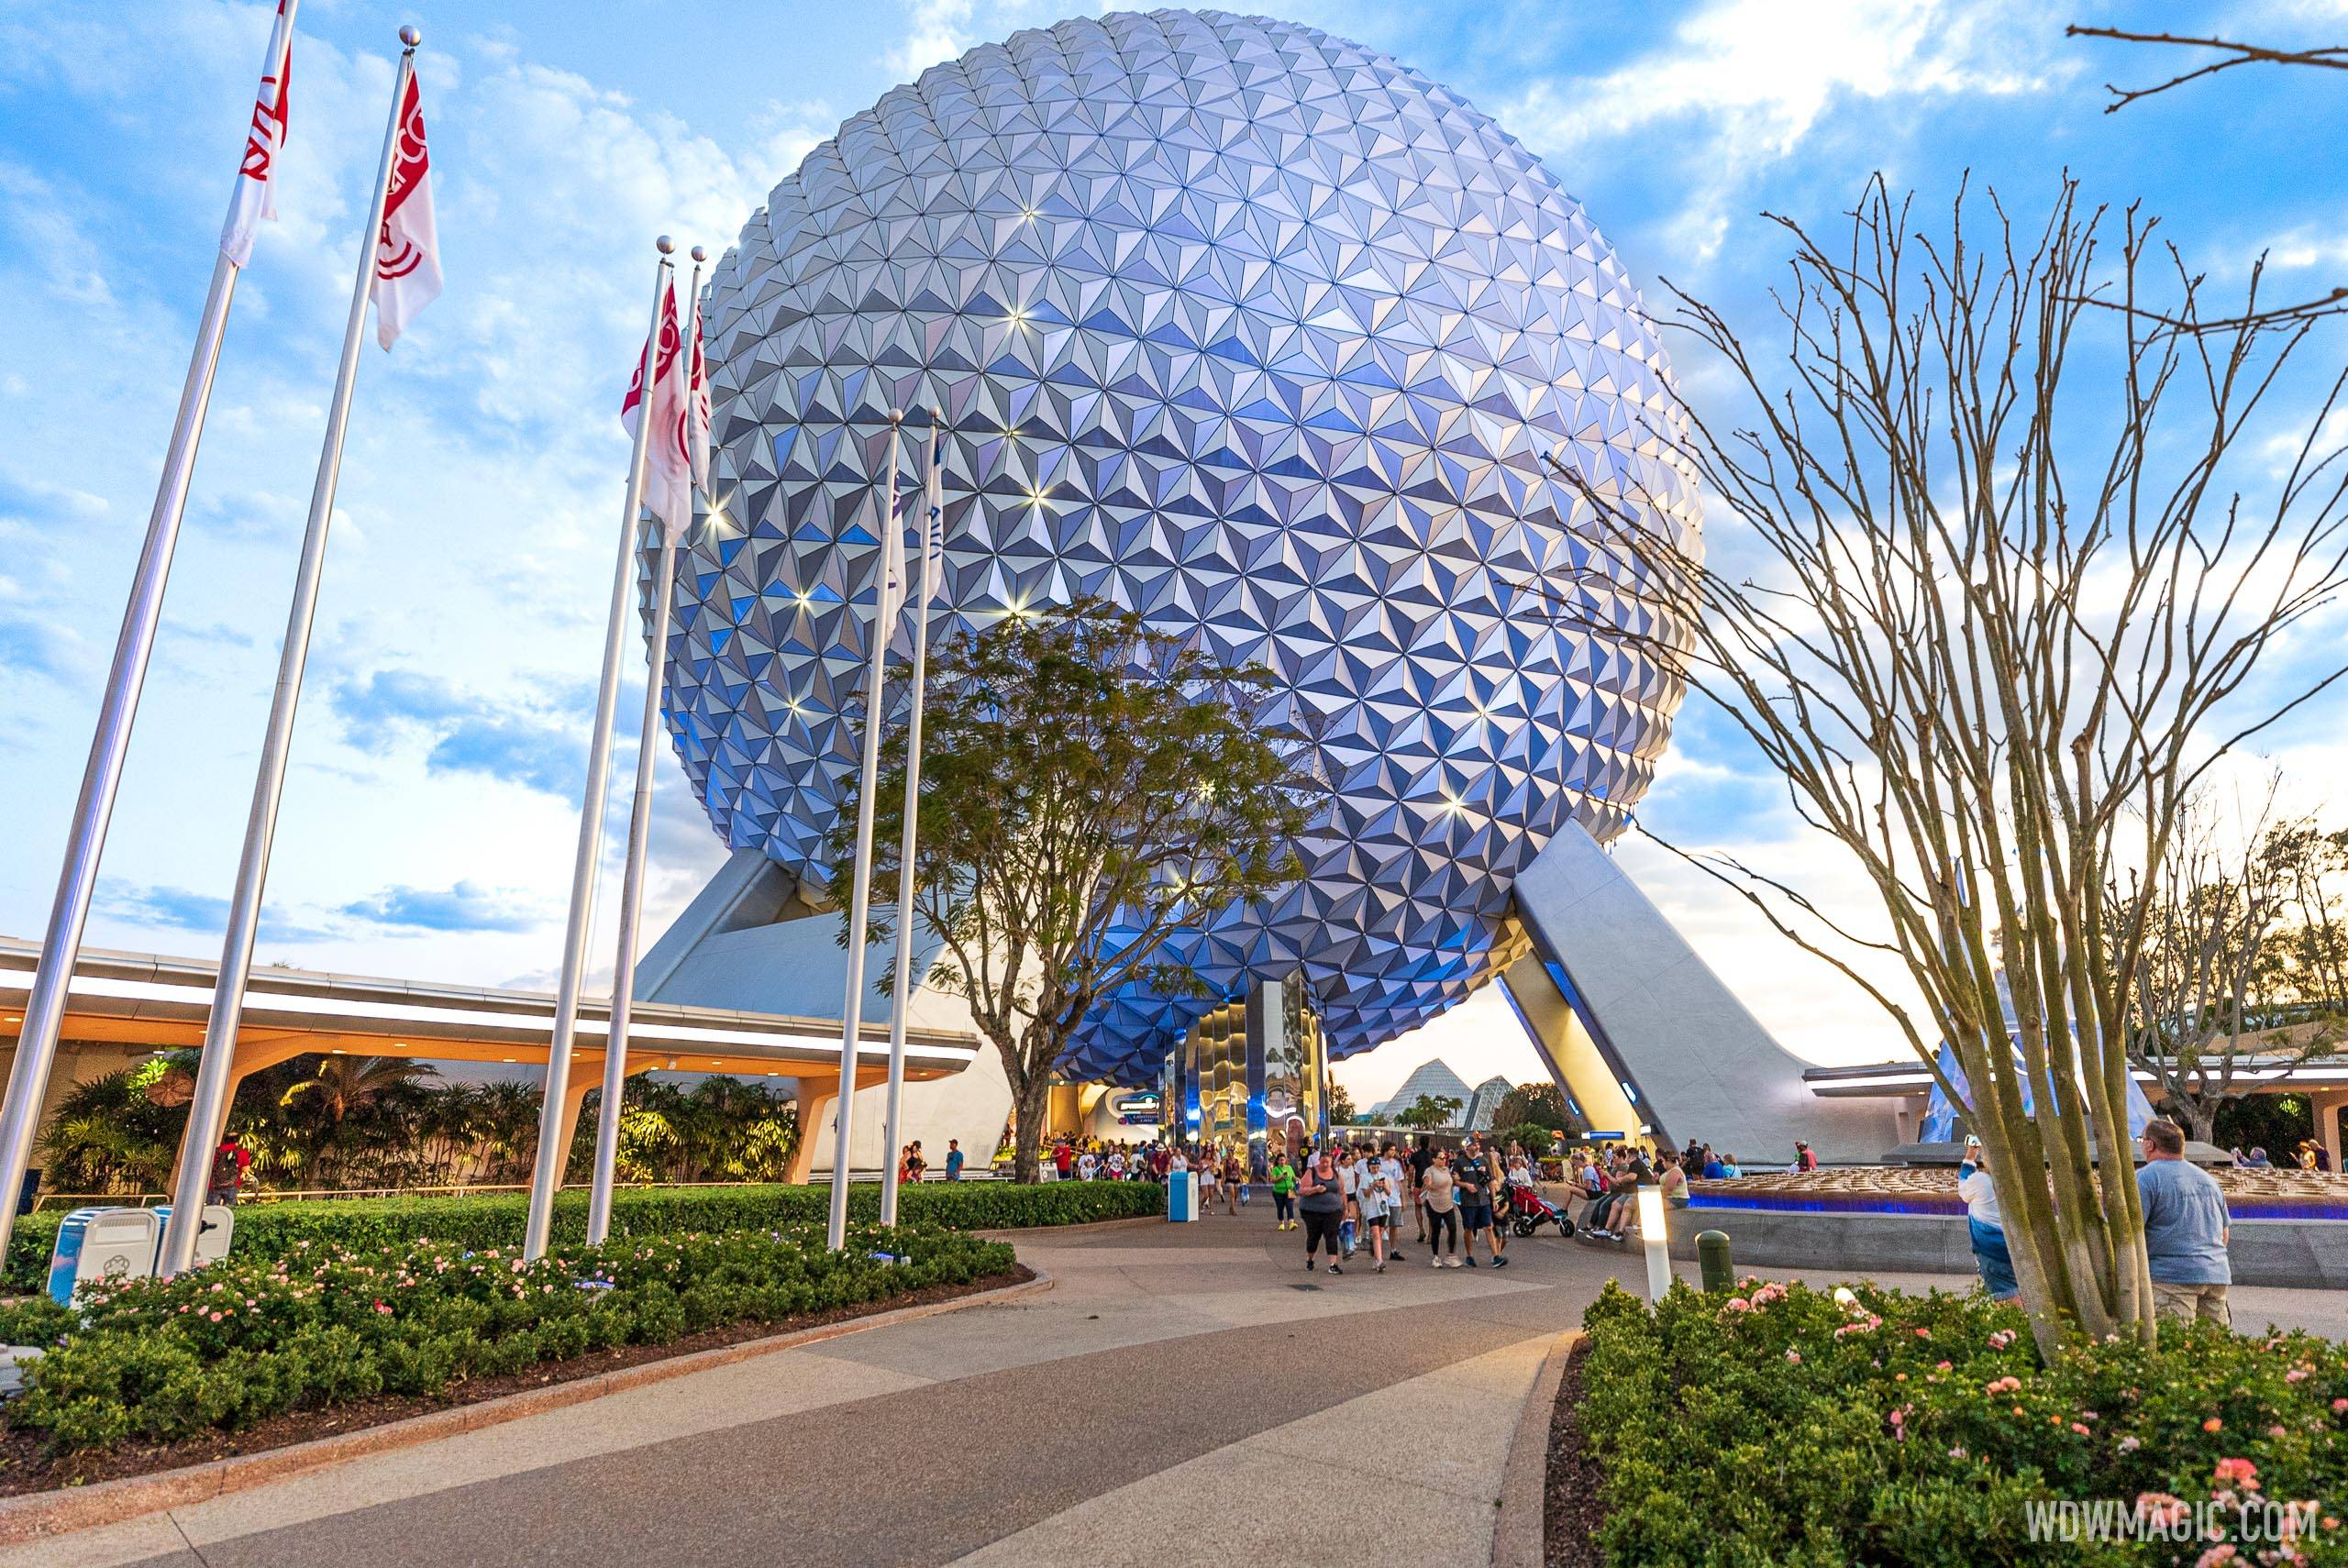 New Year's Eve crowds bring long waits to Epcot attractions